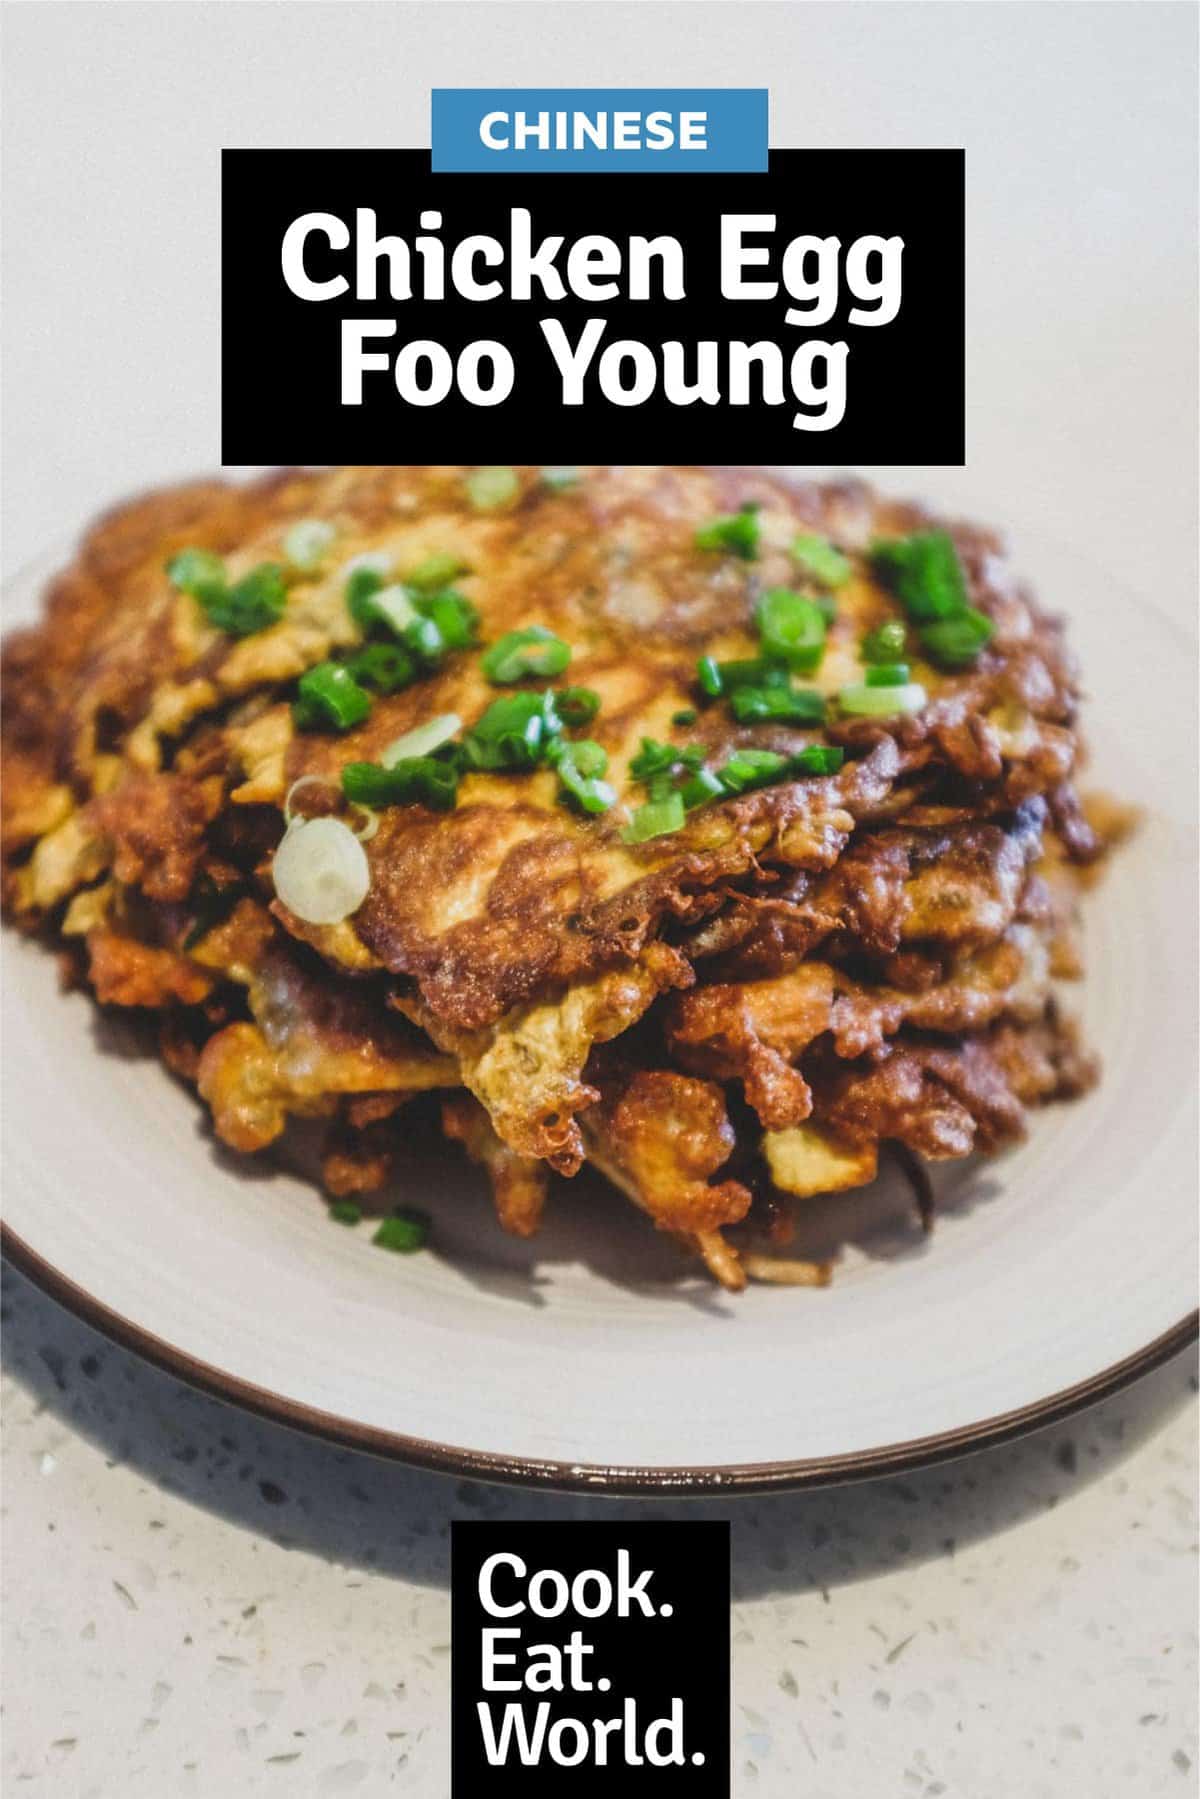 A stack of chicken egg foo young patties